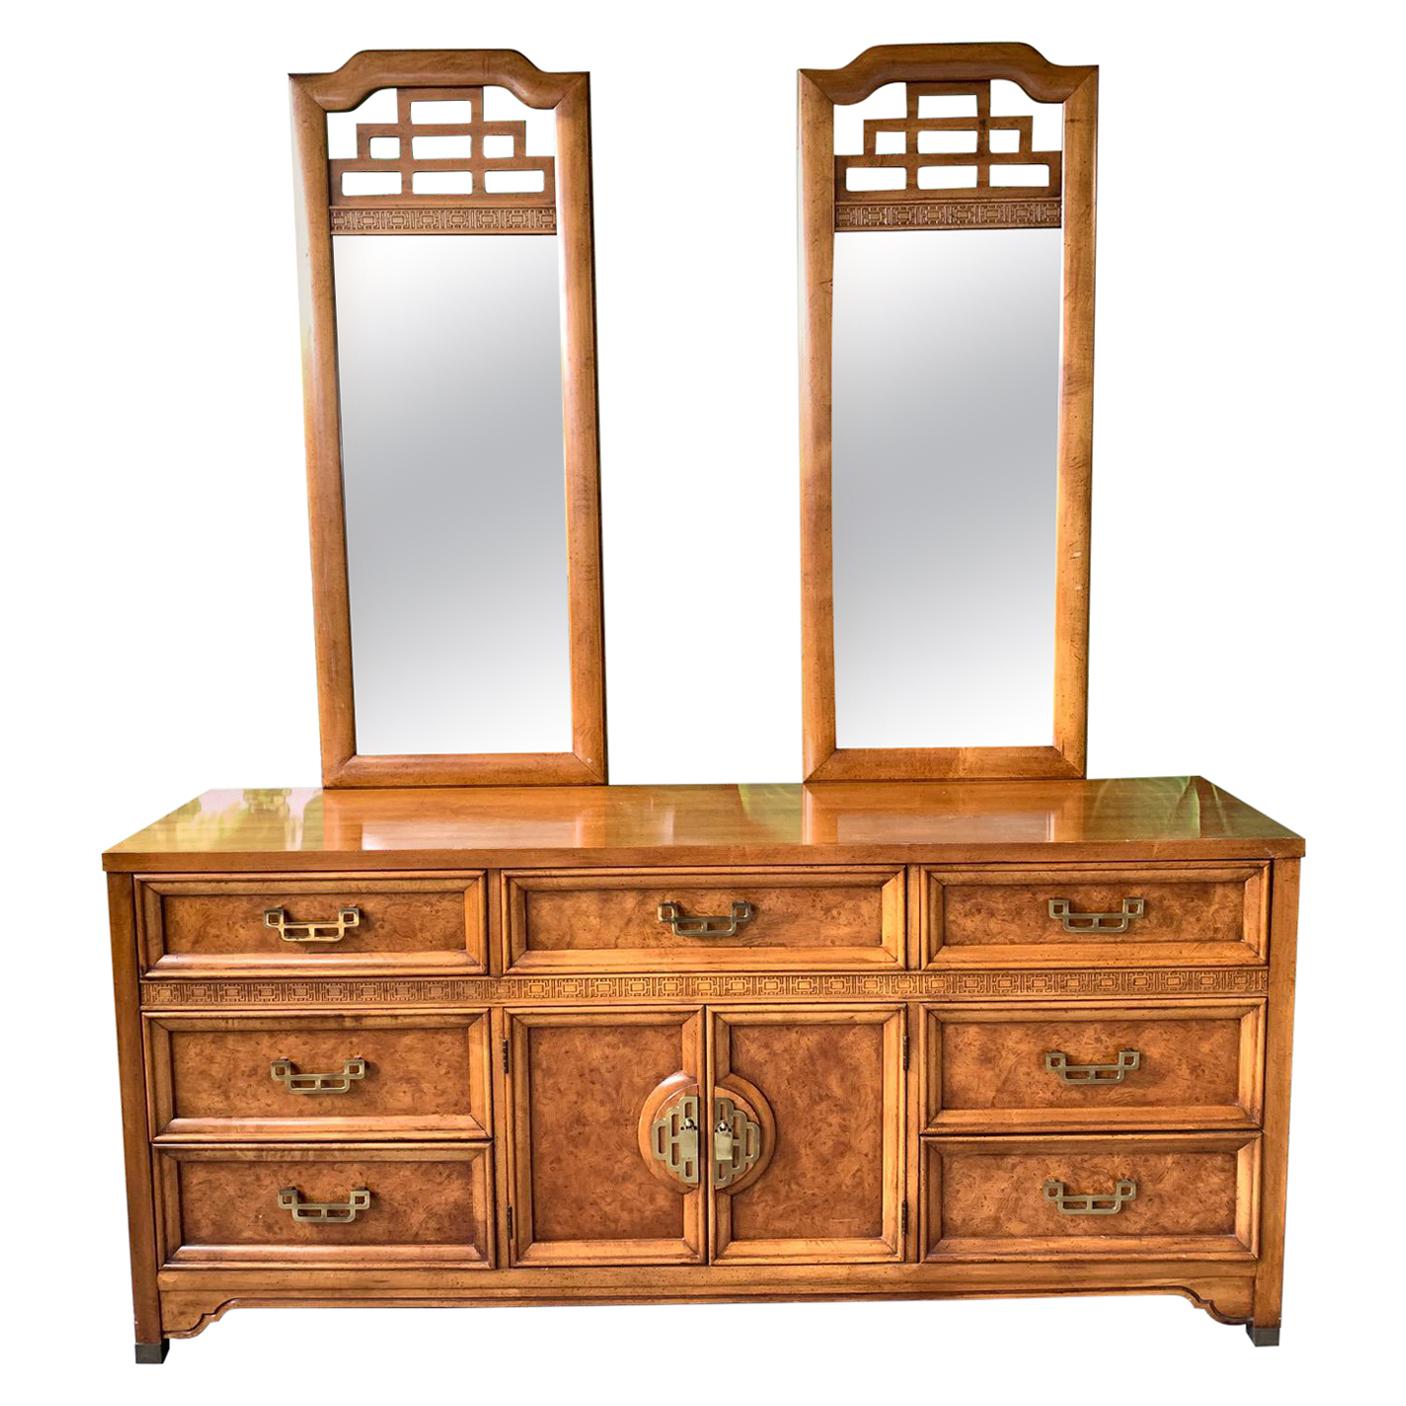 Asian Chinoiserie Burl Dresser "Mandarin" Collection by Henry Link